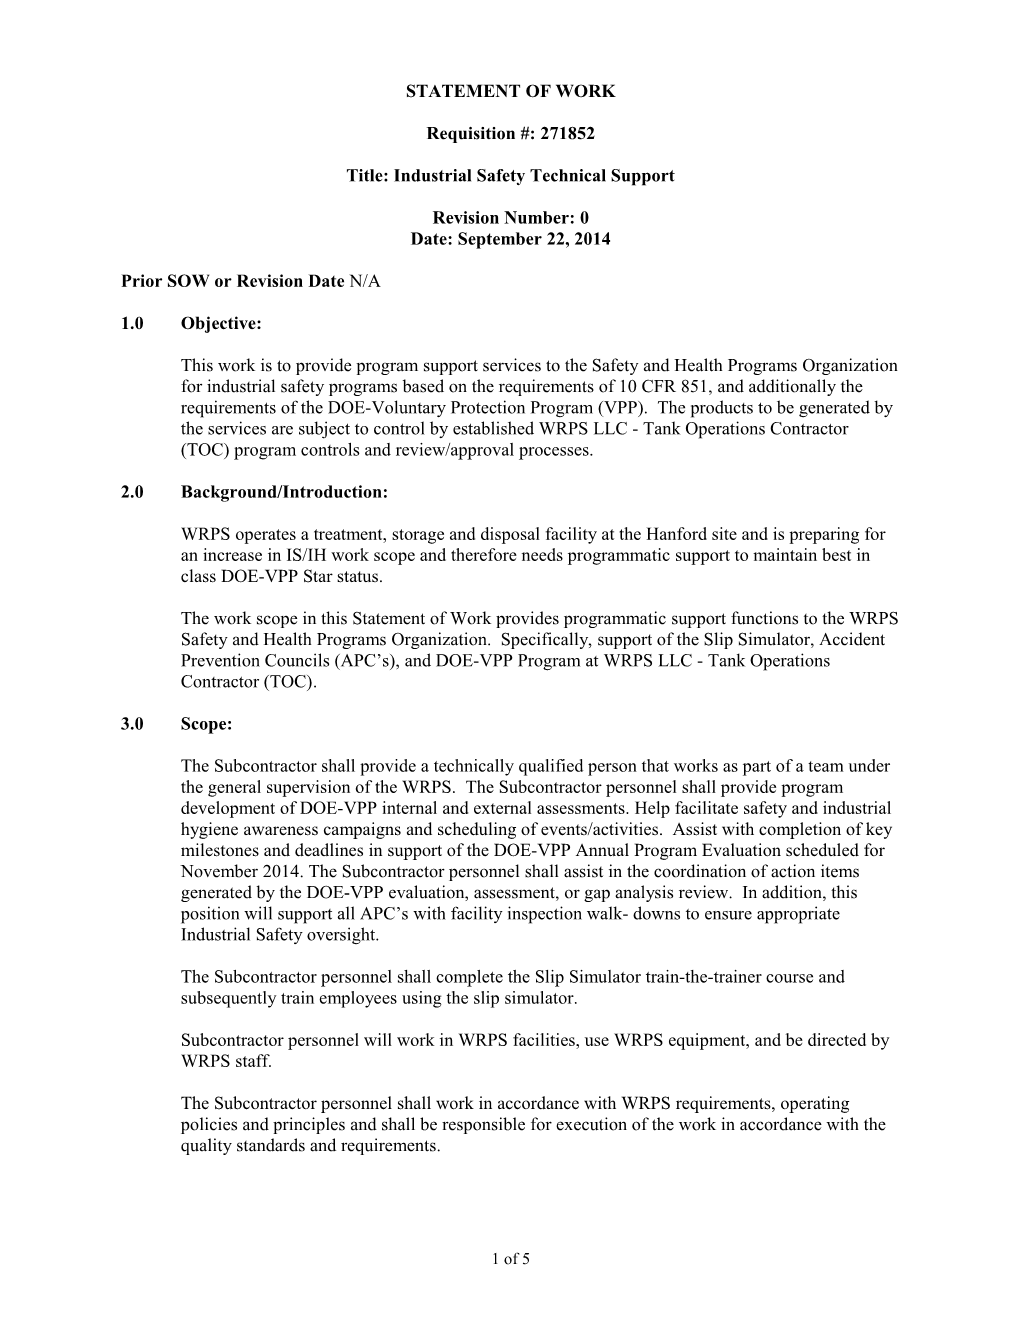 HNF-IP-0842 Volume 10 Section 3.24 Statement of Work for a Contract Requisition